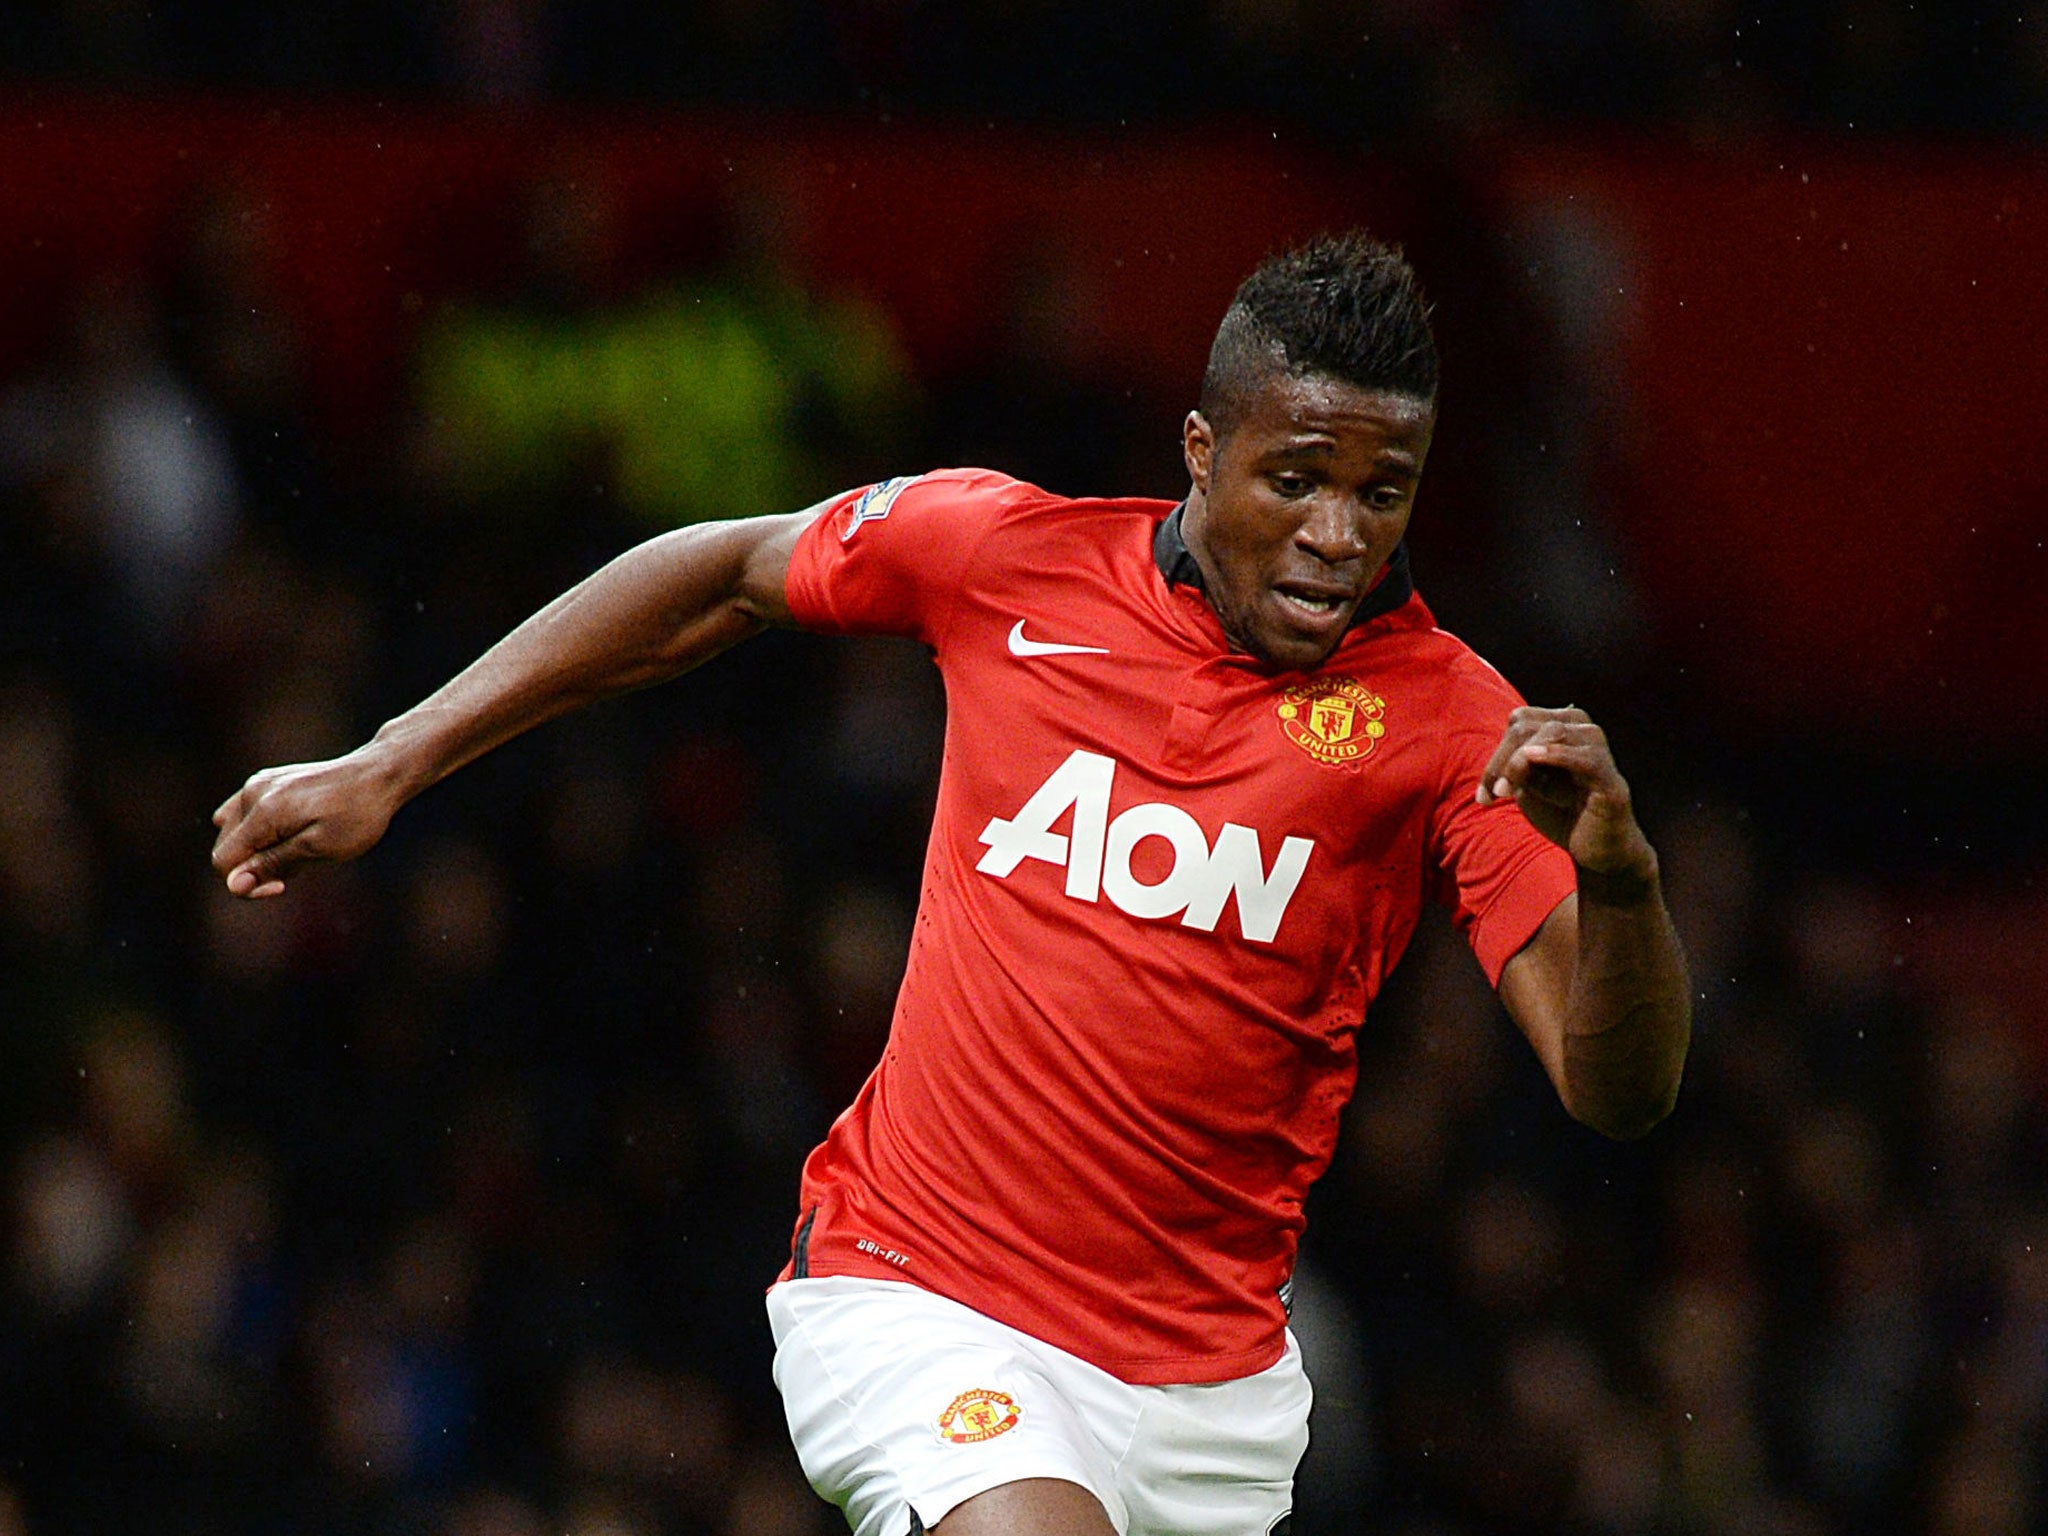 Wilfried Zaha has made just two substitute appearances for United in the league since joining